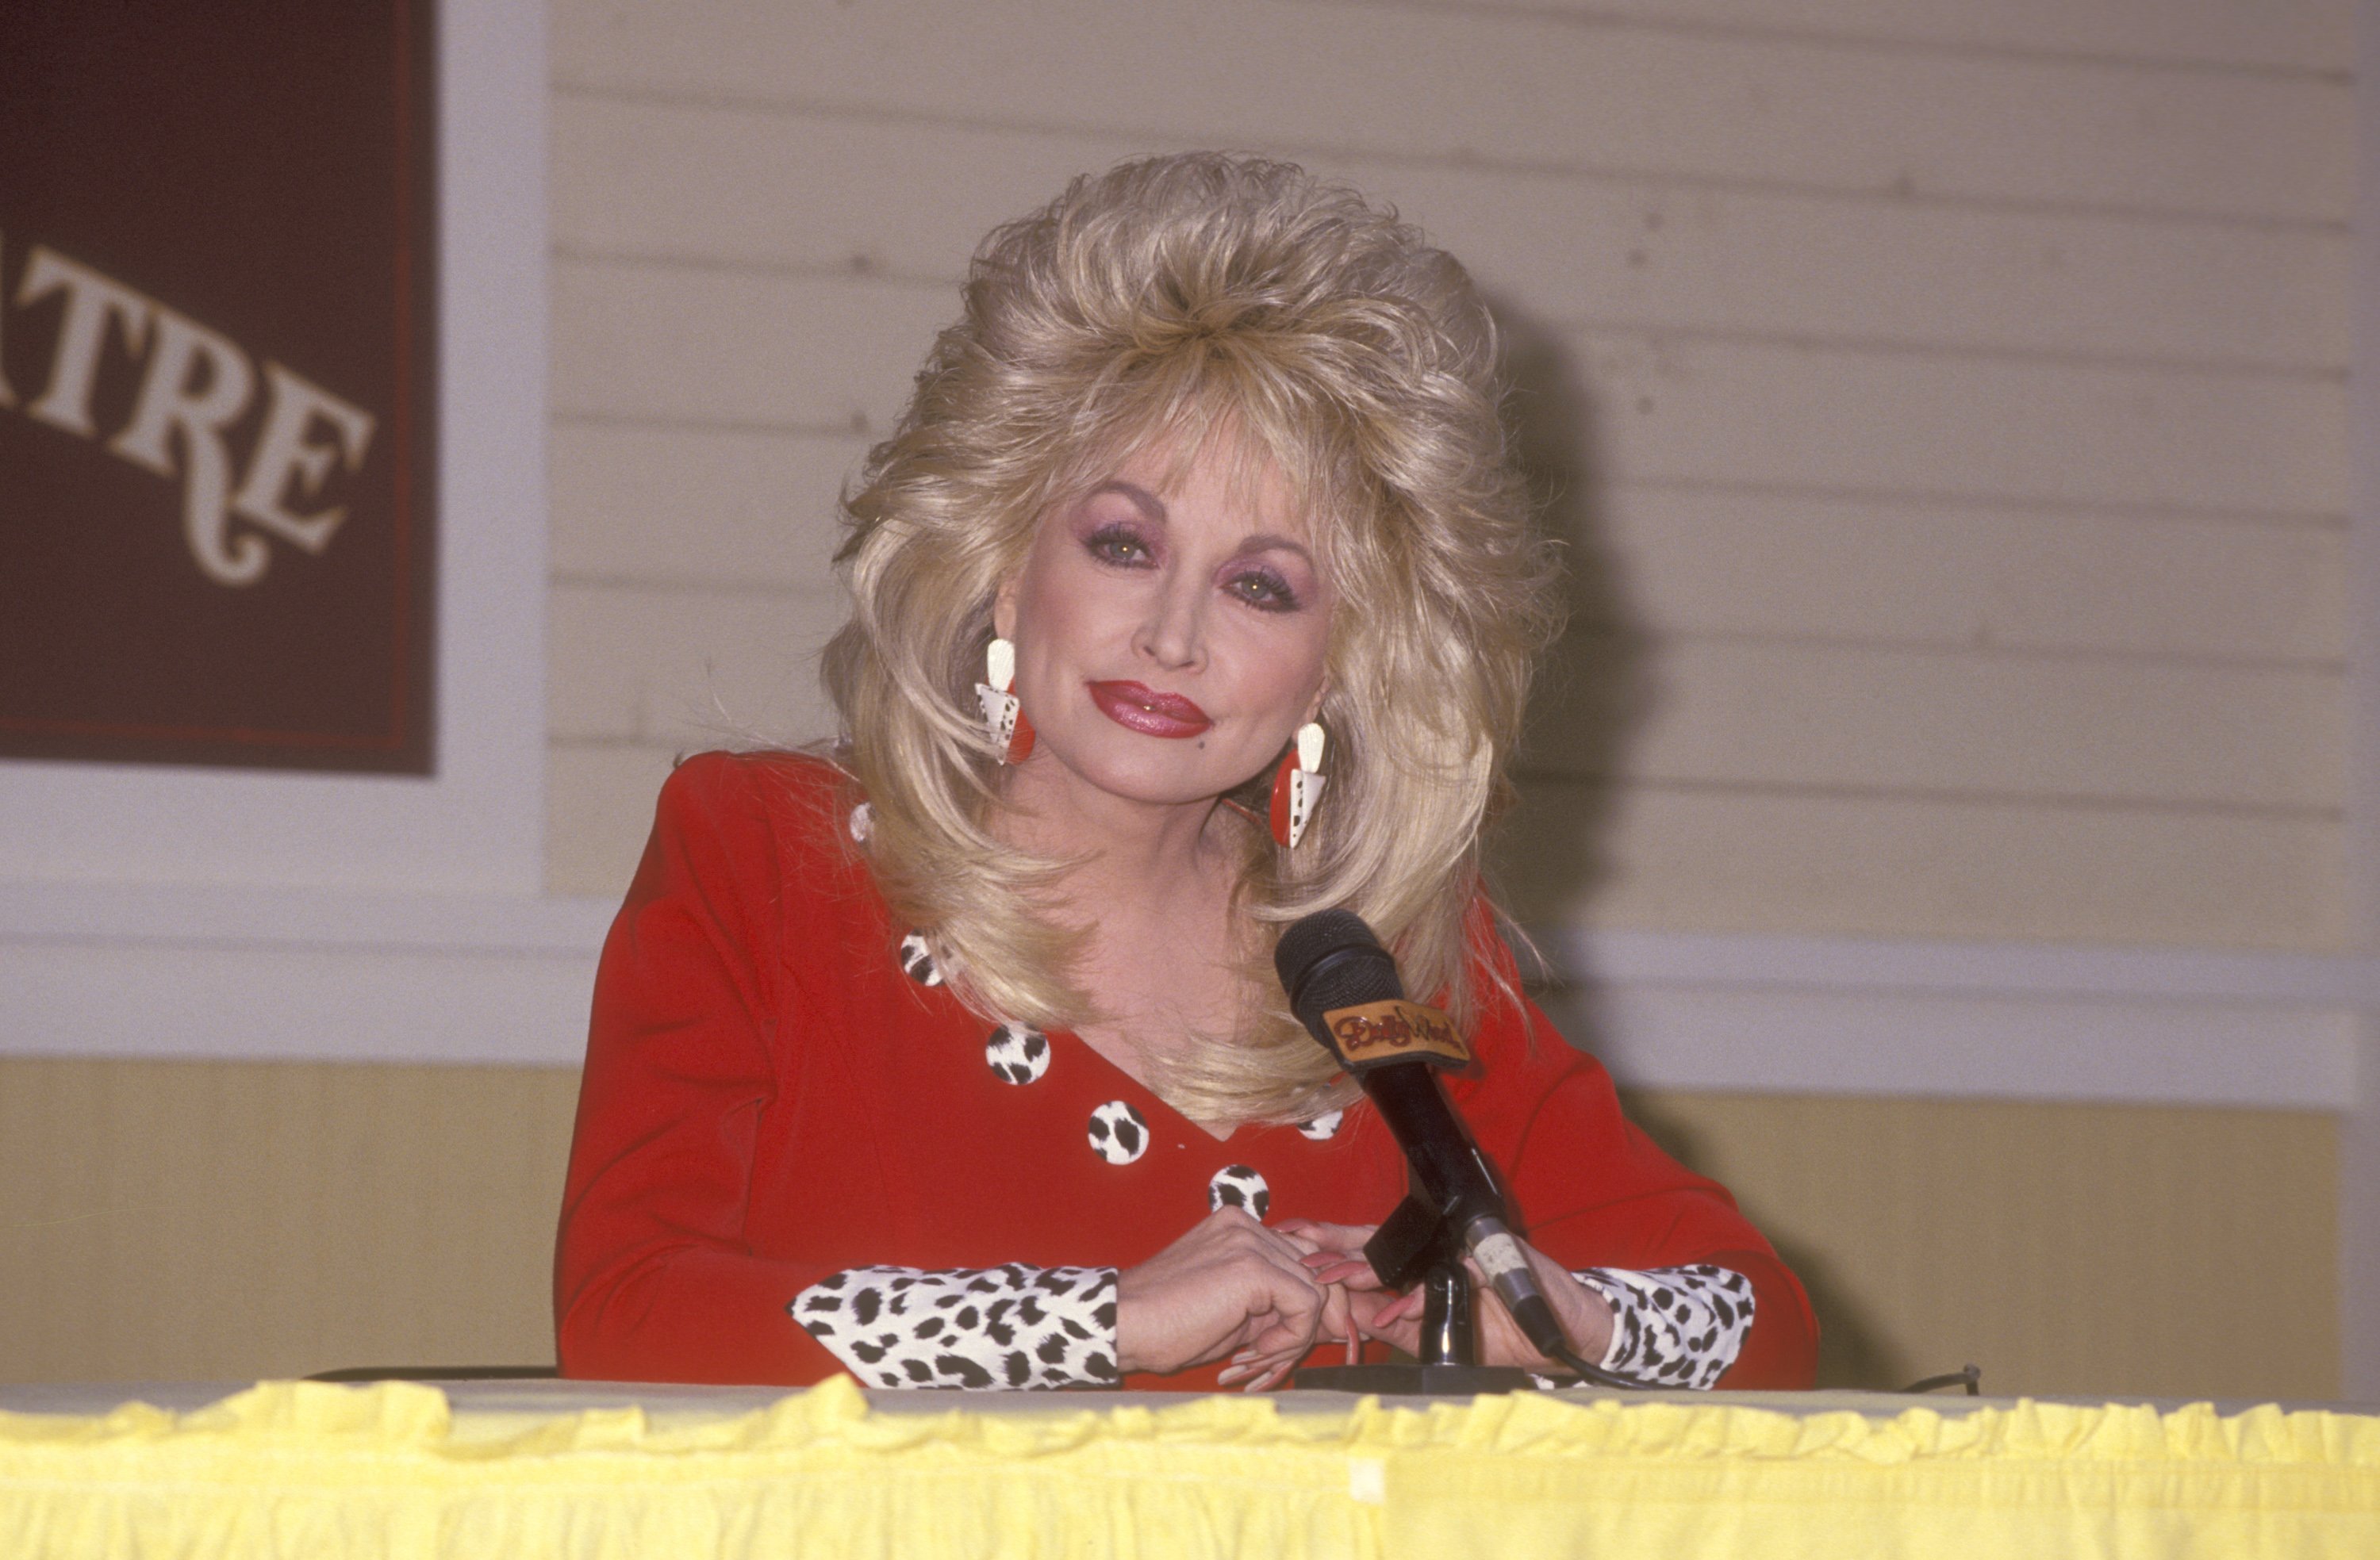 Dolly Parton attends the Opening Weekend Celebration of Dollywood on April 24, 1993 at Dollywood in Pigeon Forge, Tennessee.